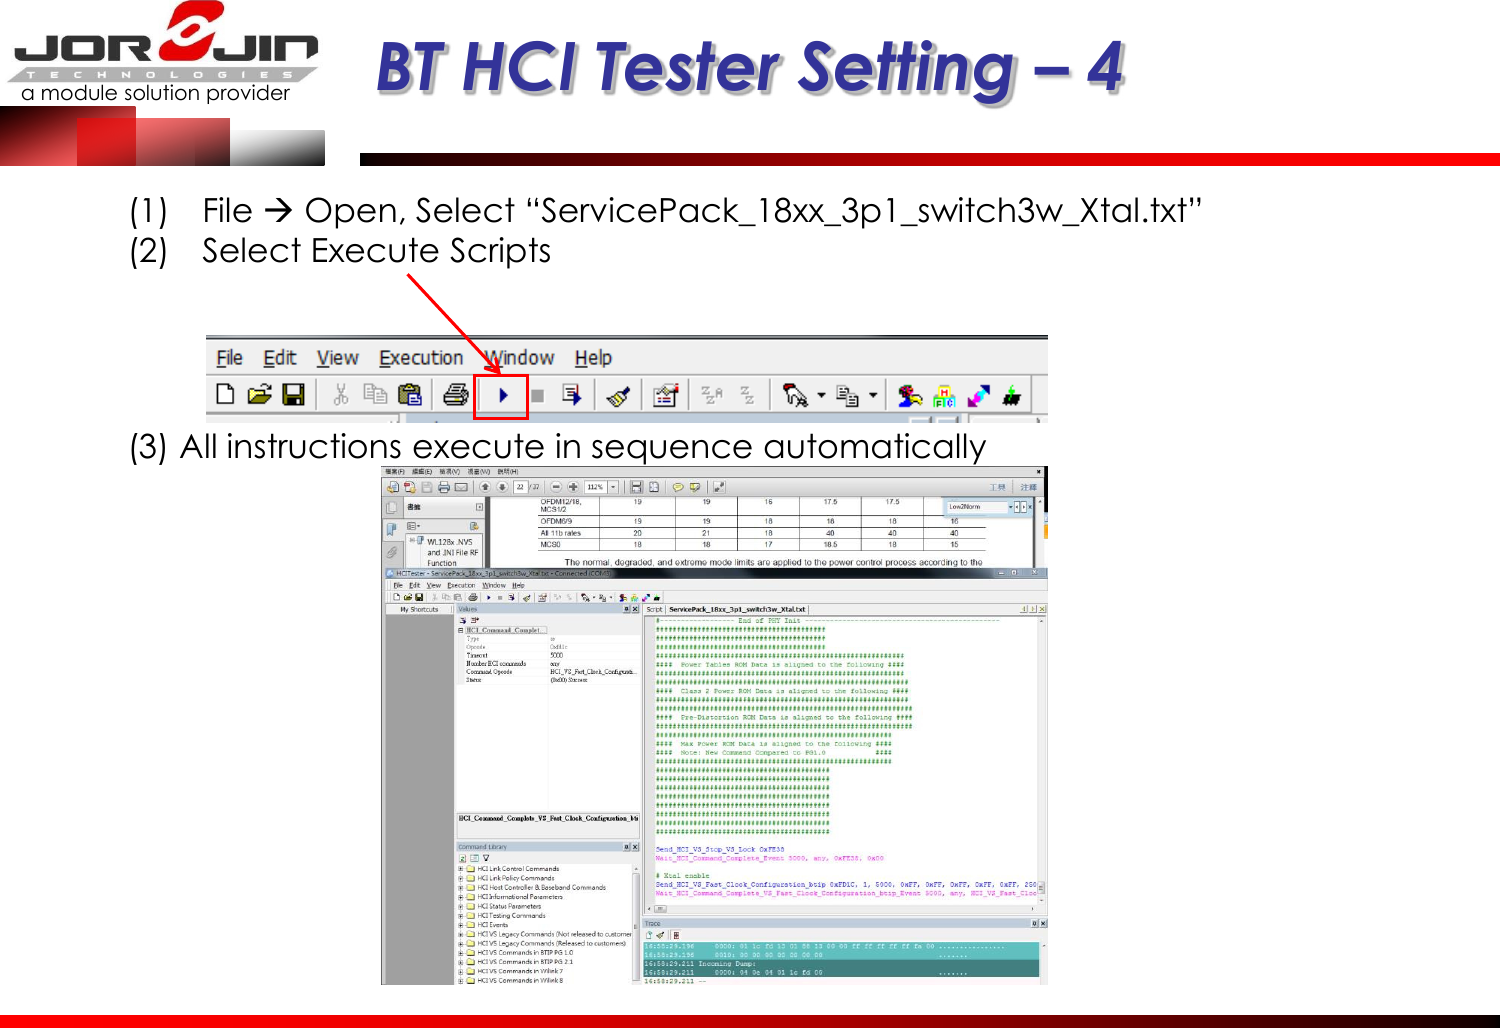 a module solution provider  BT HCI Tester Setting – 4 (1) File  Open, Select “ServicePack_18xx_3p1_switch3w_Xtal.txt” (2) Select Execute Scripts (3) All instructions execute in sequence automatically 